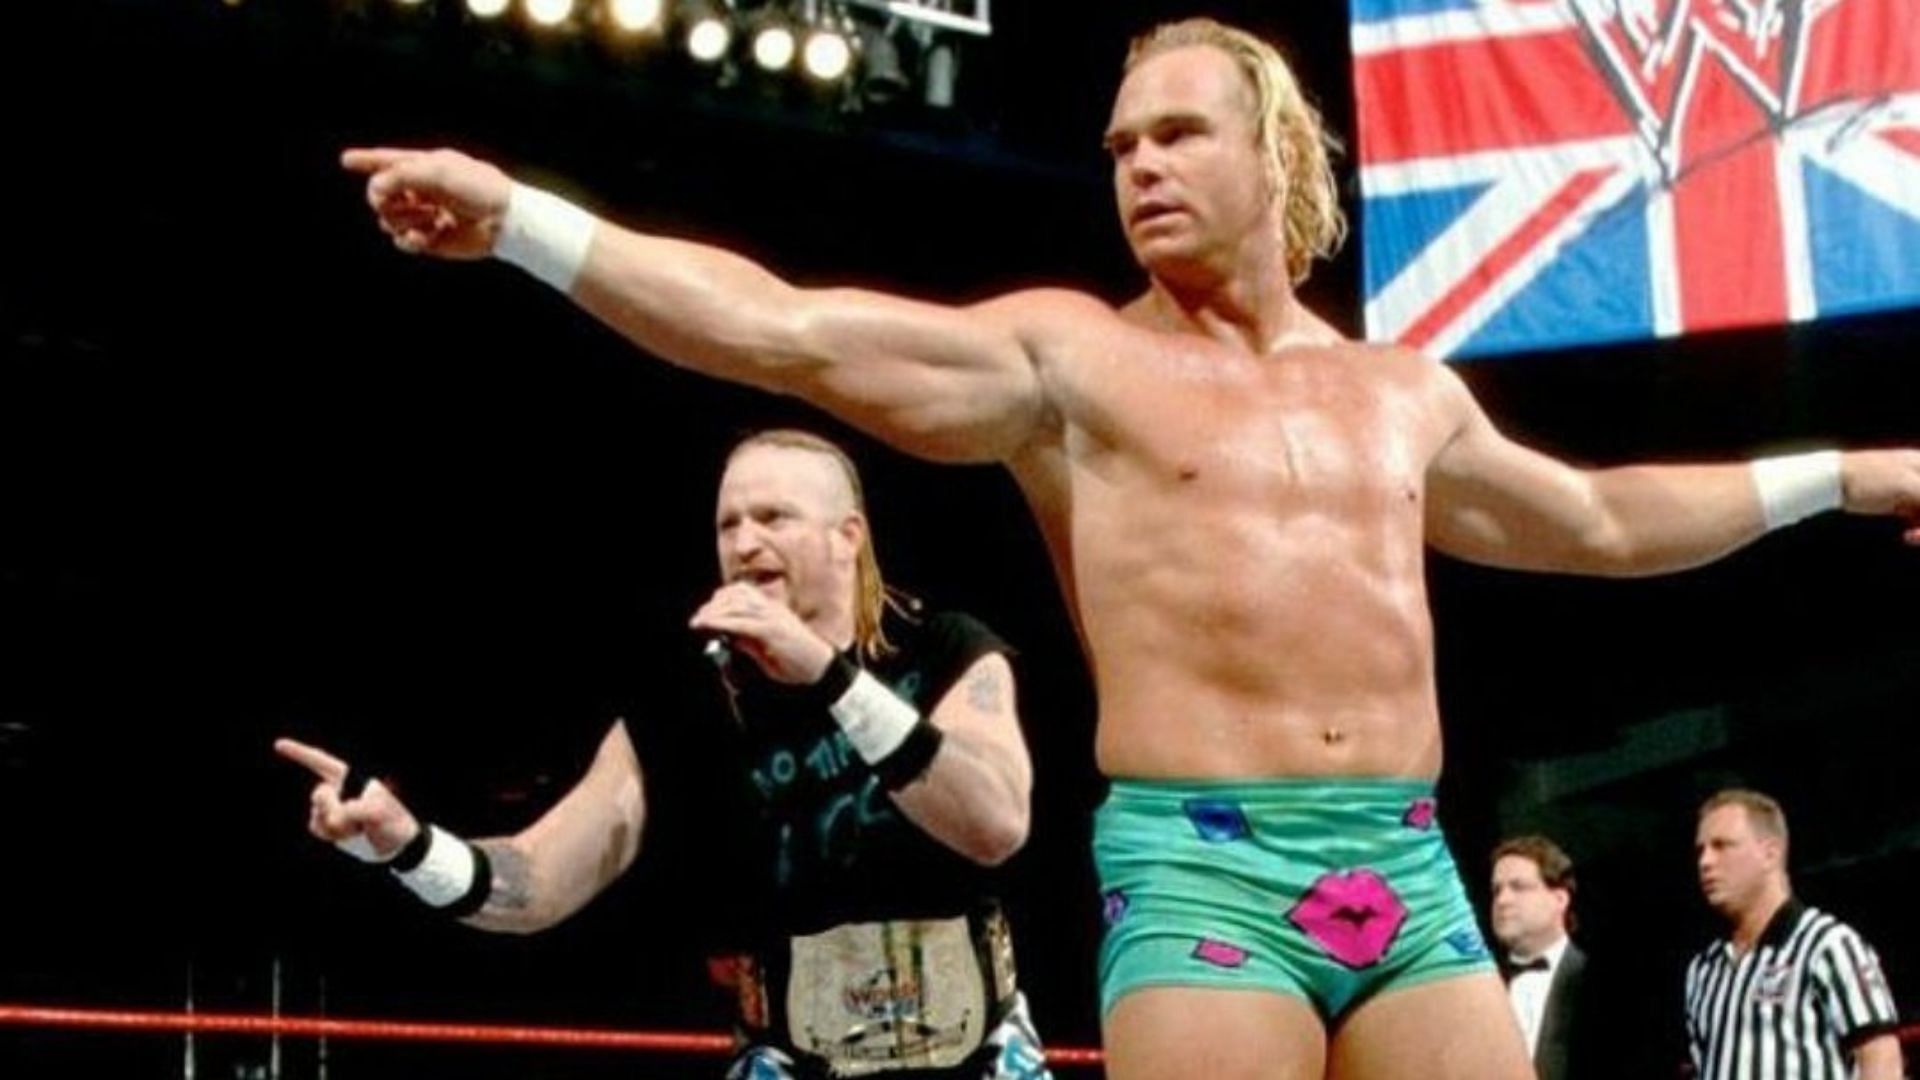 Road Dogg and Billy Gunn as The New Age Outlaws in WWE